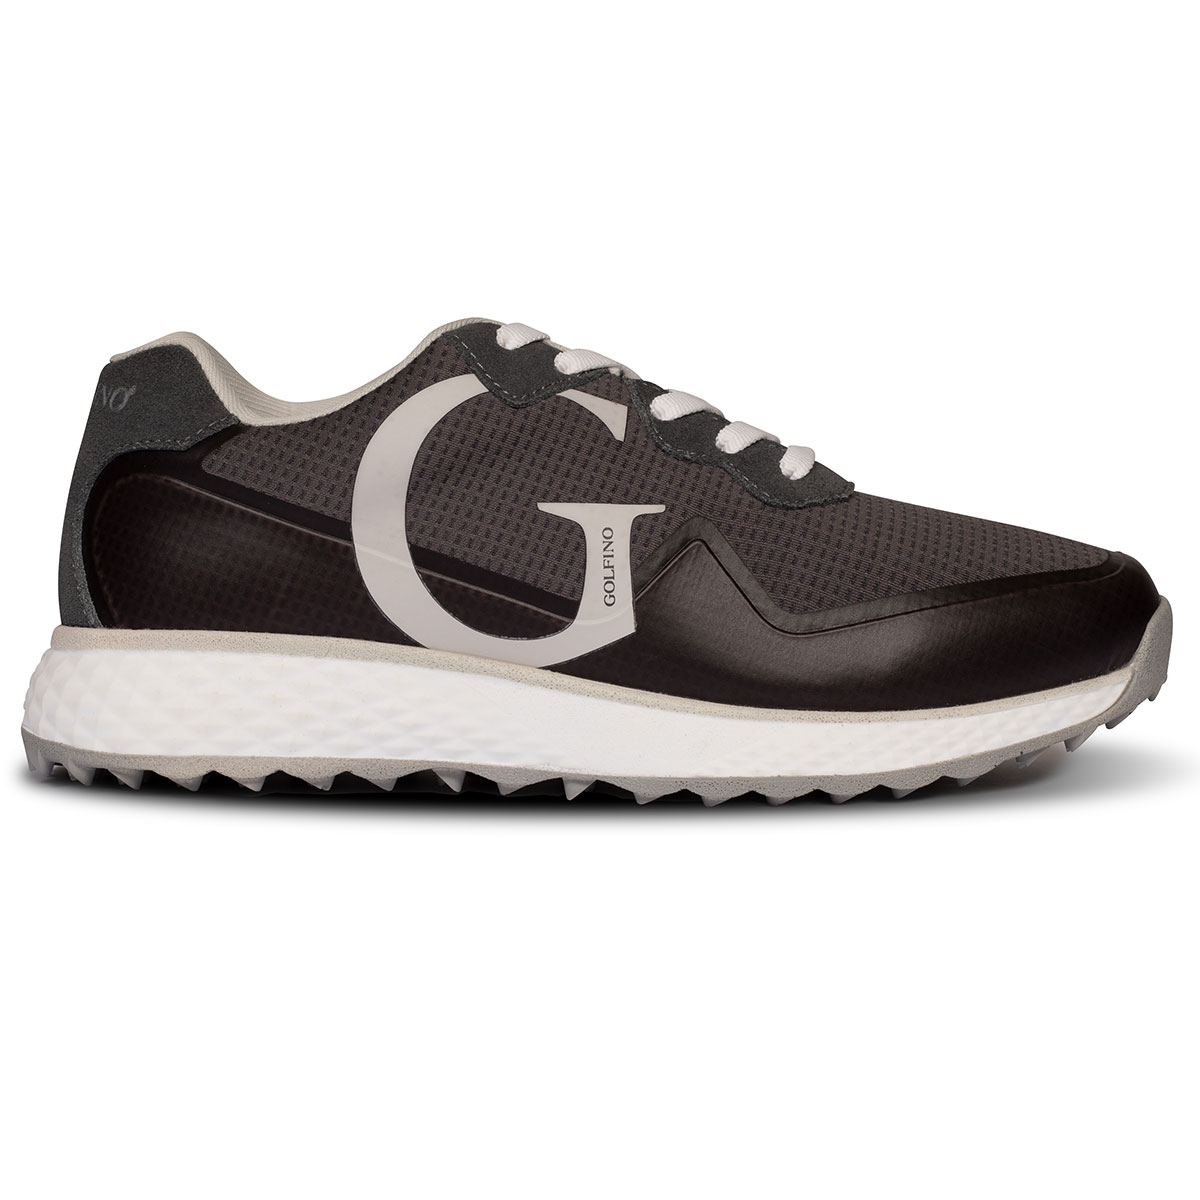  Sporty ladies' shoes in retro look with mesh